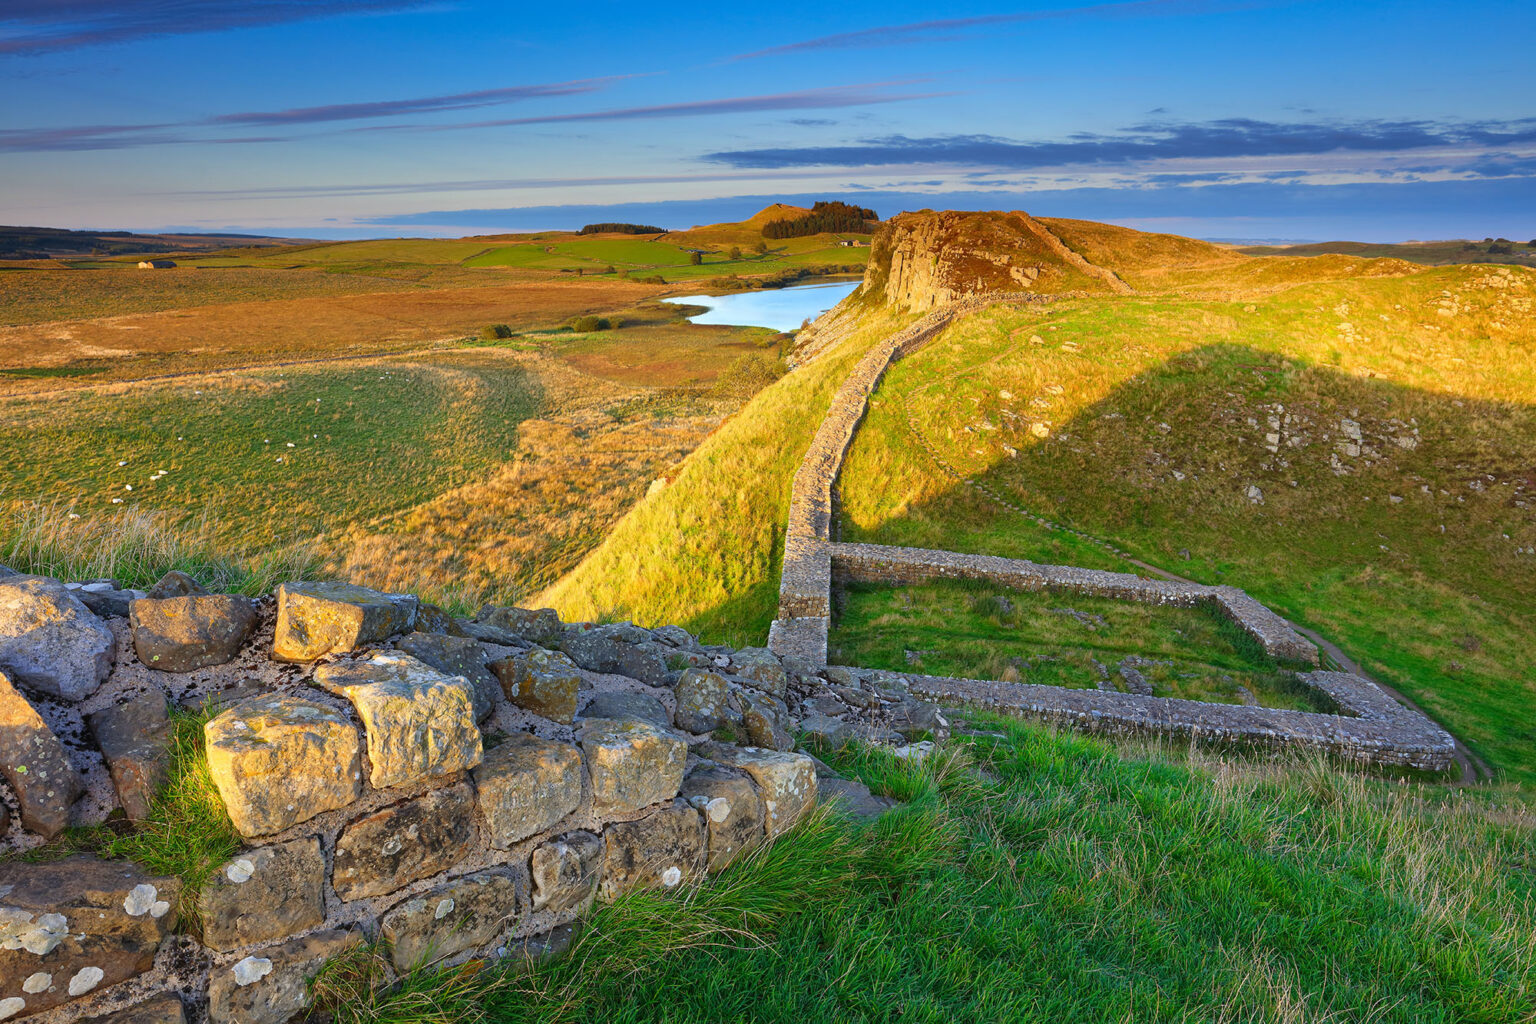 hadrian's wall bus tour from newcastle